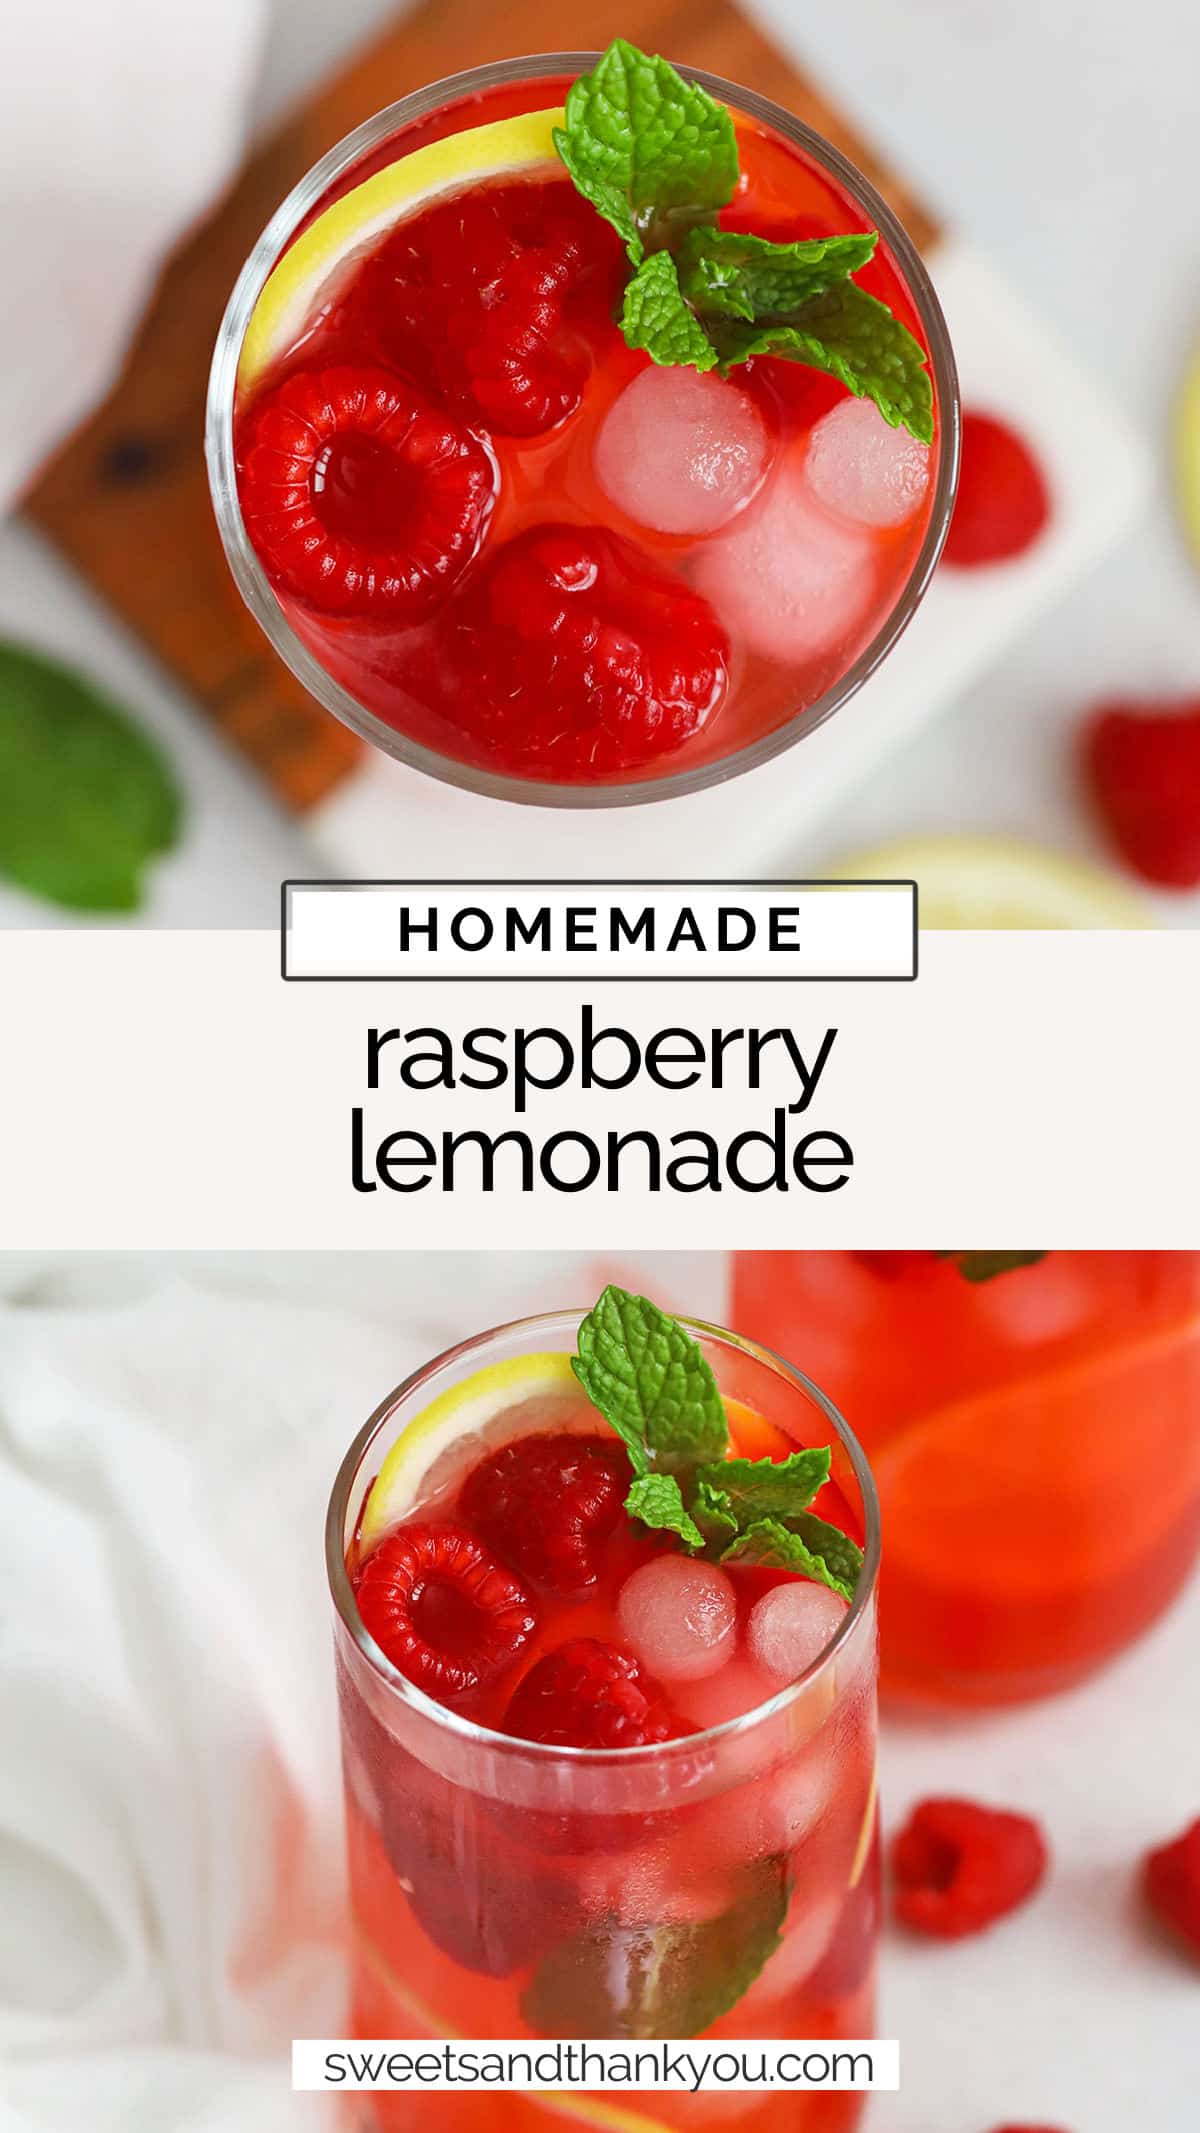 This easy homemade raspberry lemonade recipe is the perfect drink to cool off with! Made from simple ingredients, this pretty pink drink is perfect for parties and celebrations of all kinds. // pink lemonade / raspberry lemonade from scratch / raspberry lemonade with real lemon / 4 ingredient raspberry lemonade / summer mocktail / summer drink recipe / pink drink recipe / pink mocktail / valentines day mocktail / raspberry mocktail / from scratch raspberry lemonade